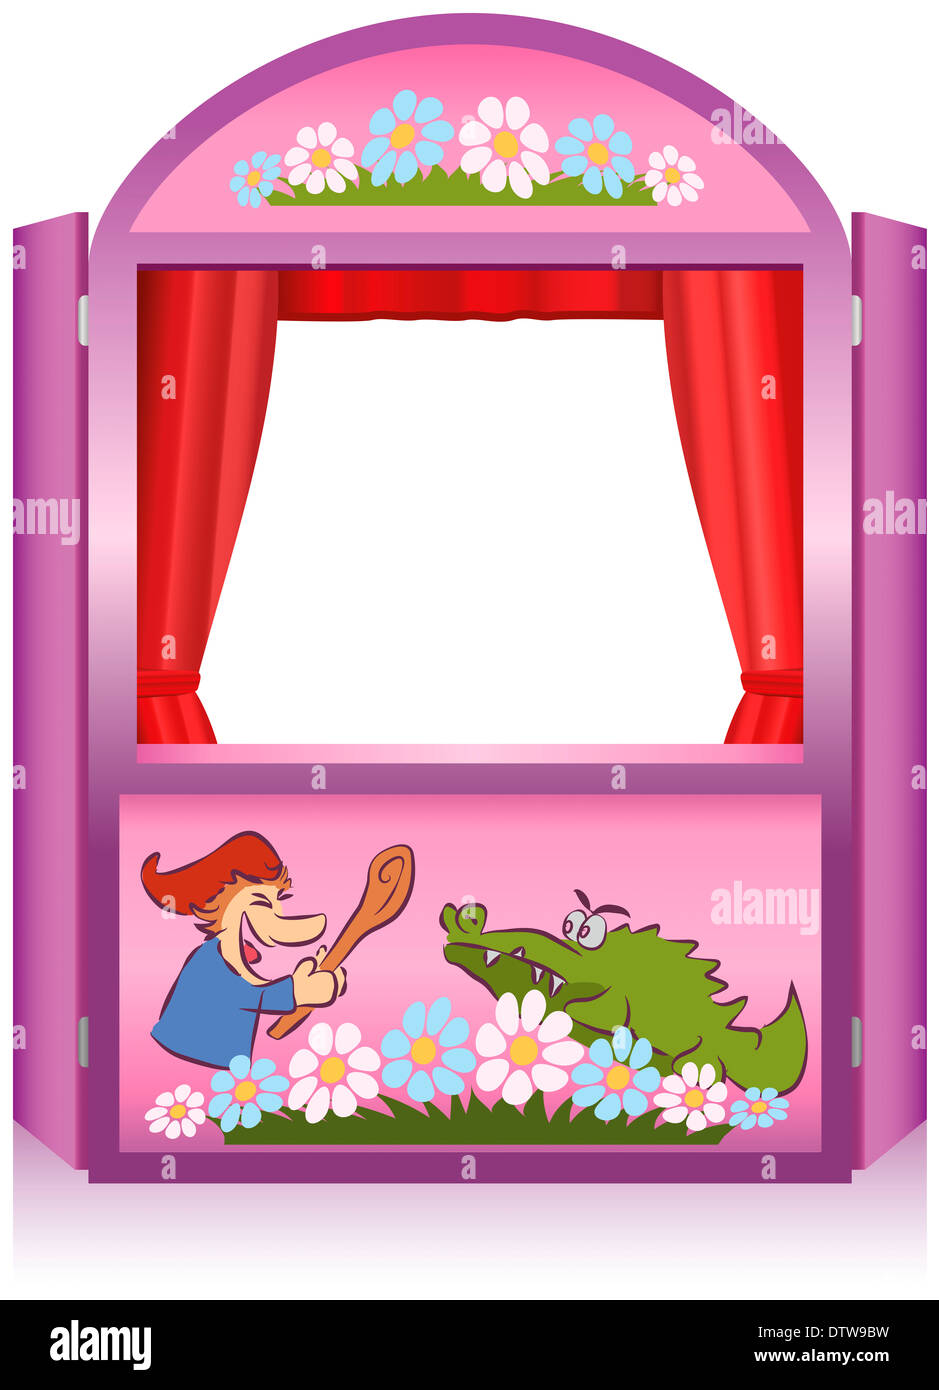 Punch and Judy, a traditional, popular puppet show. Pink booth for the puppeteer. Stock Photo